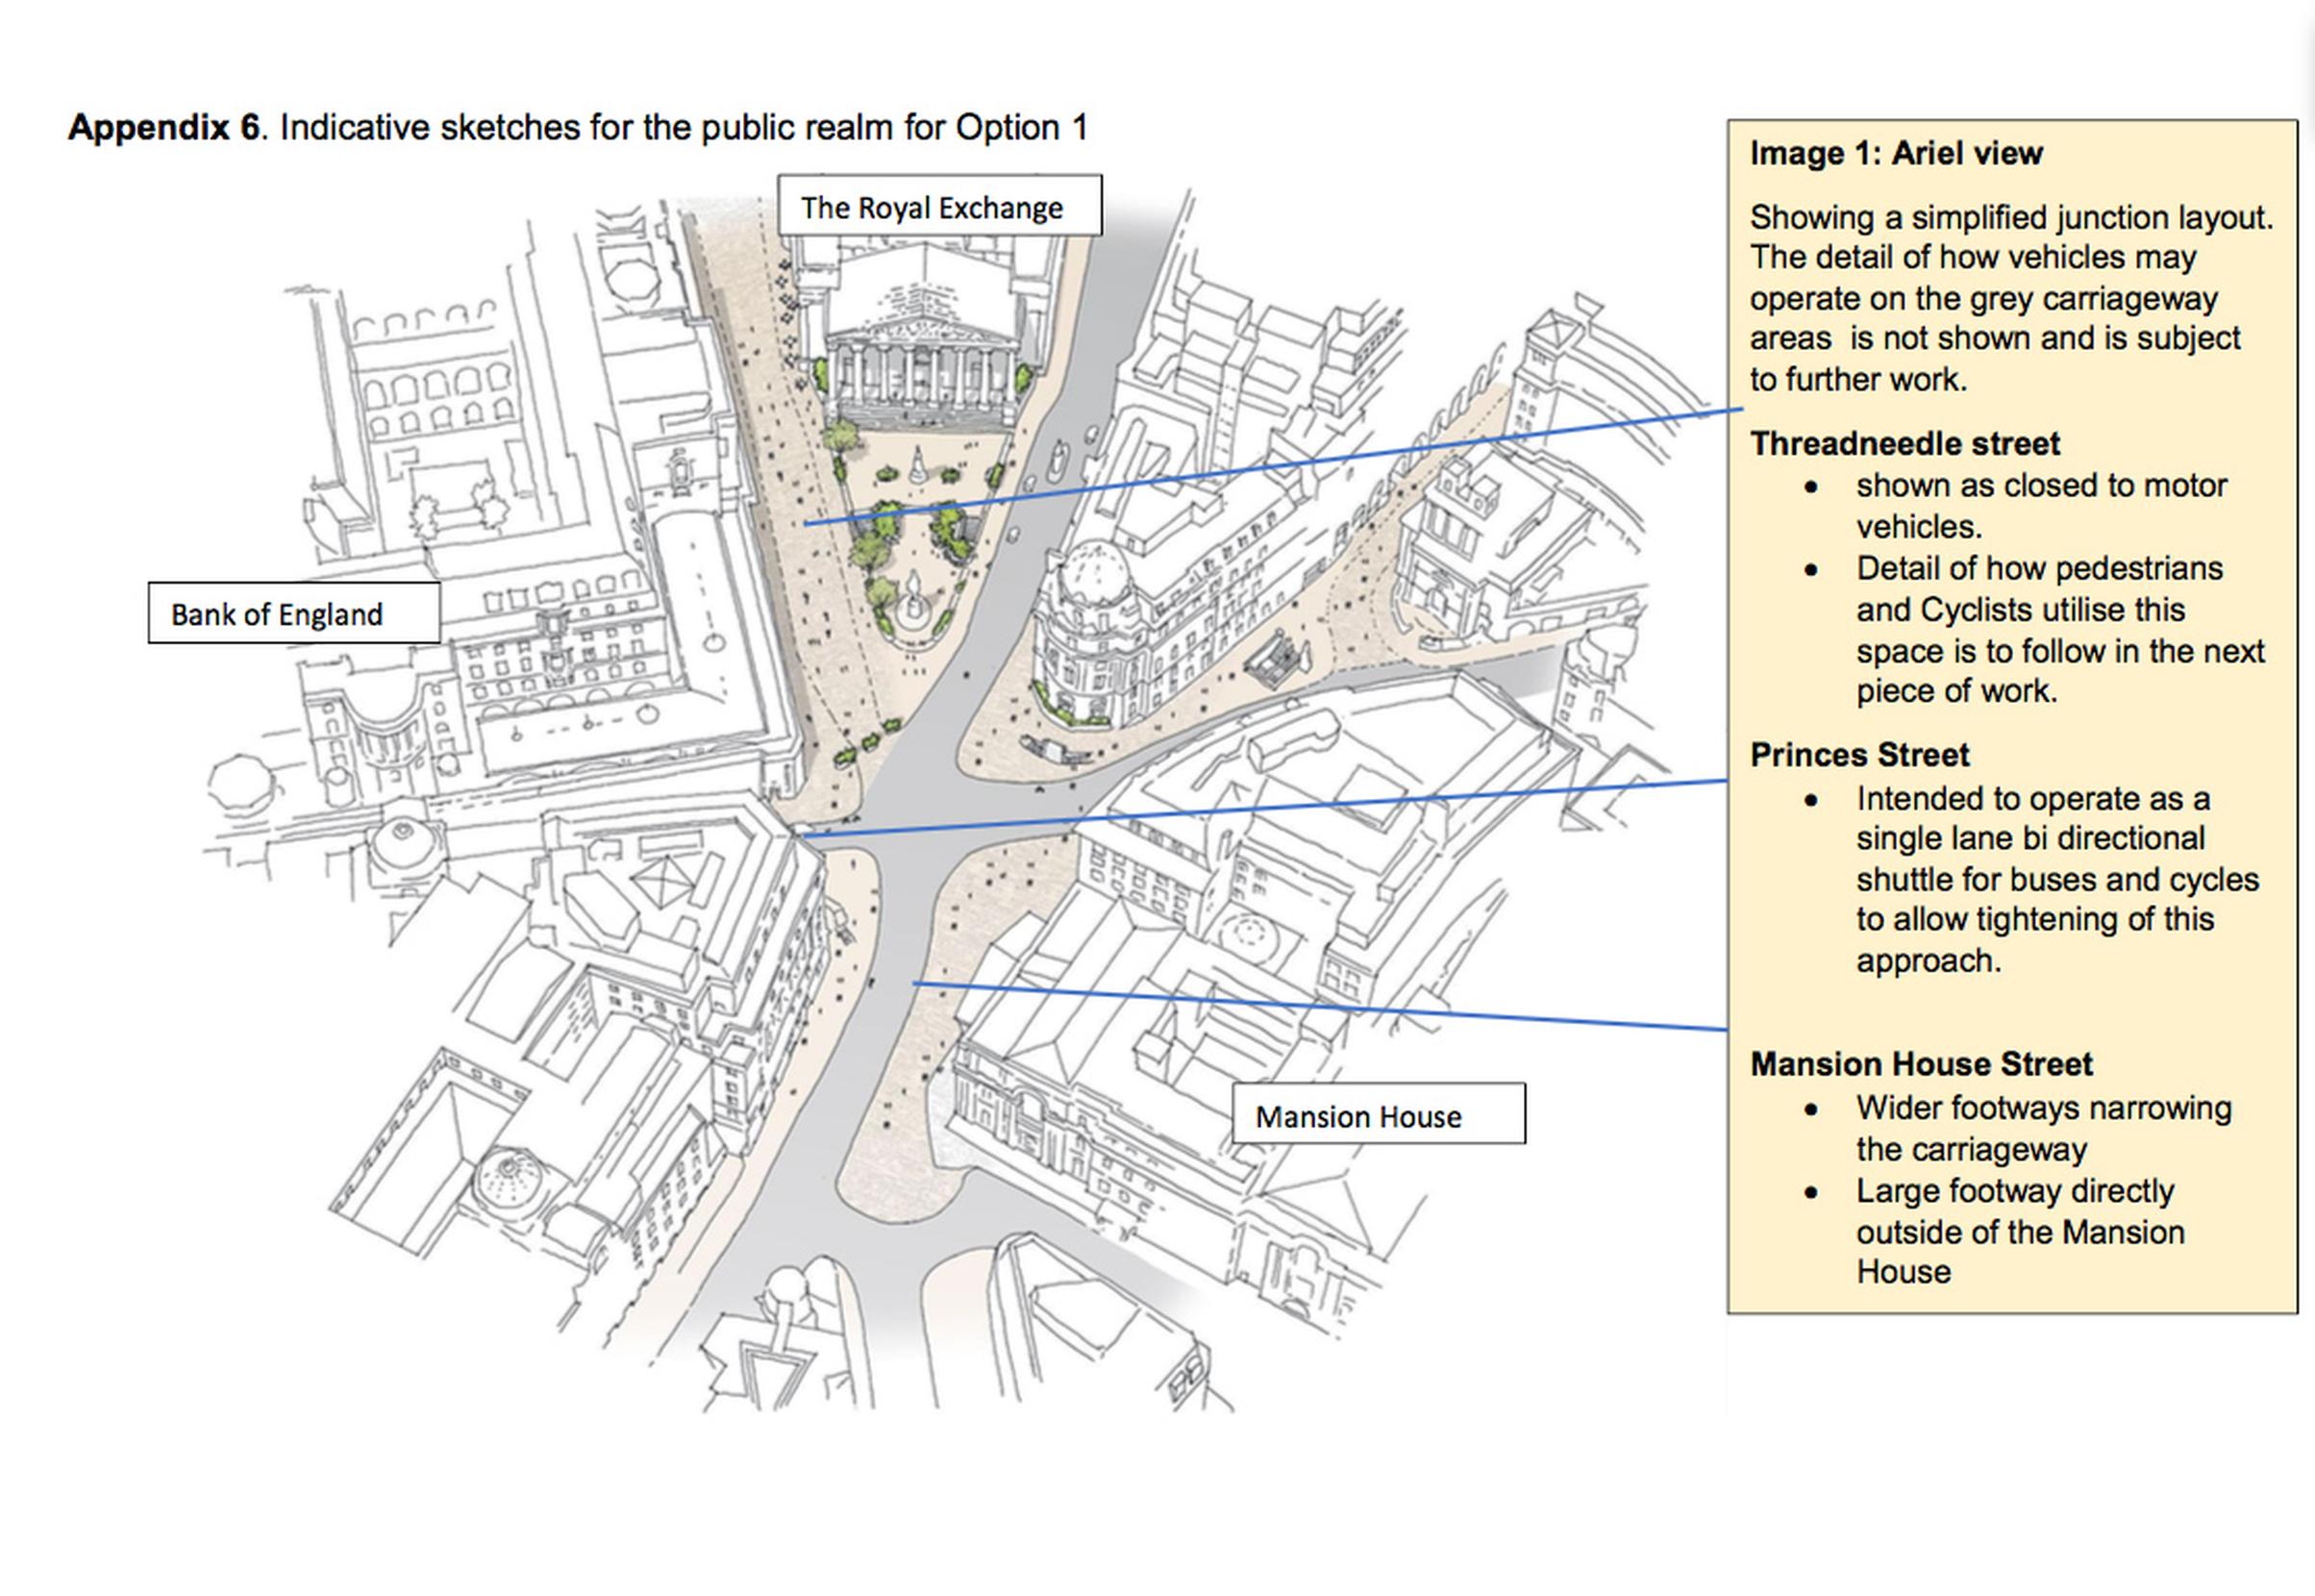 How the scheme could look
Source: City of London Corporation